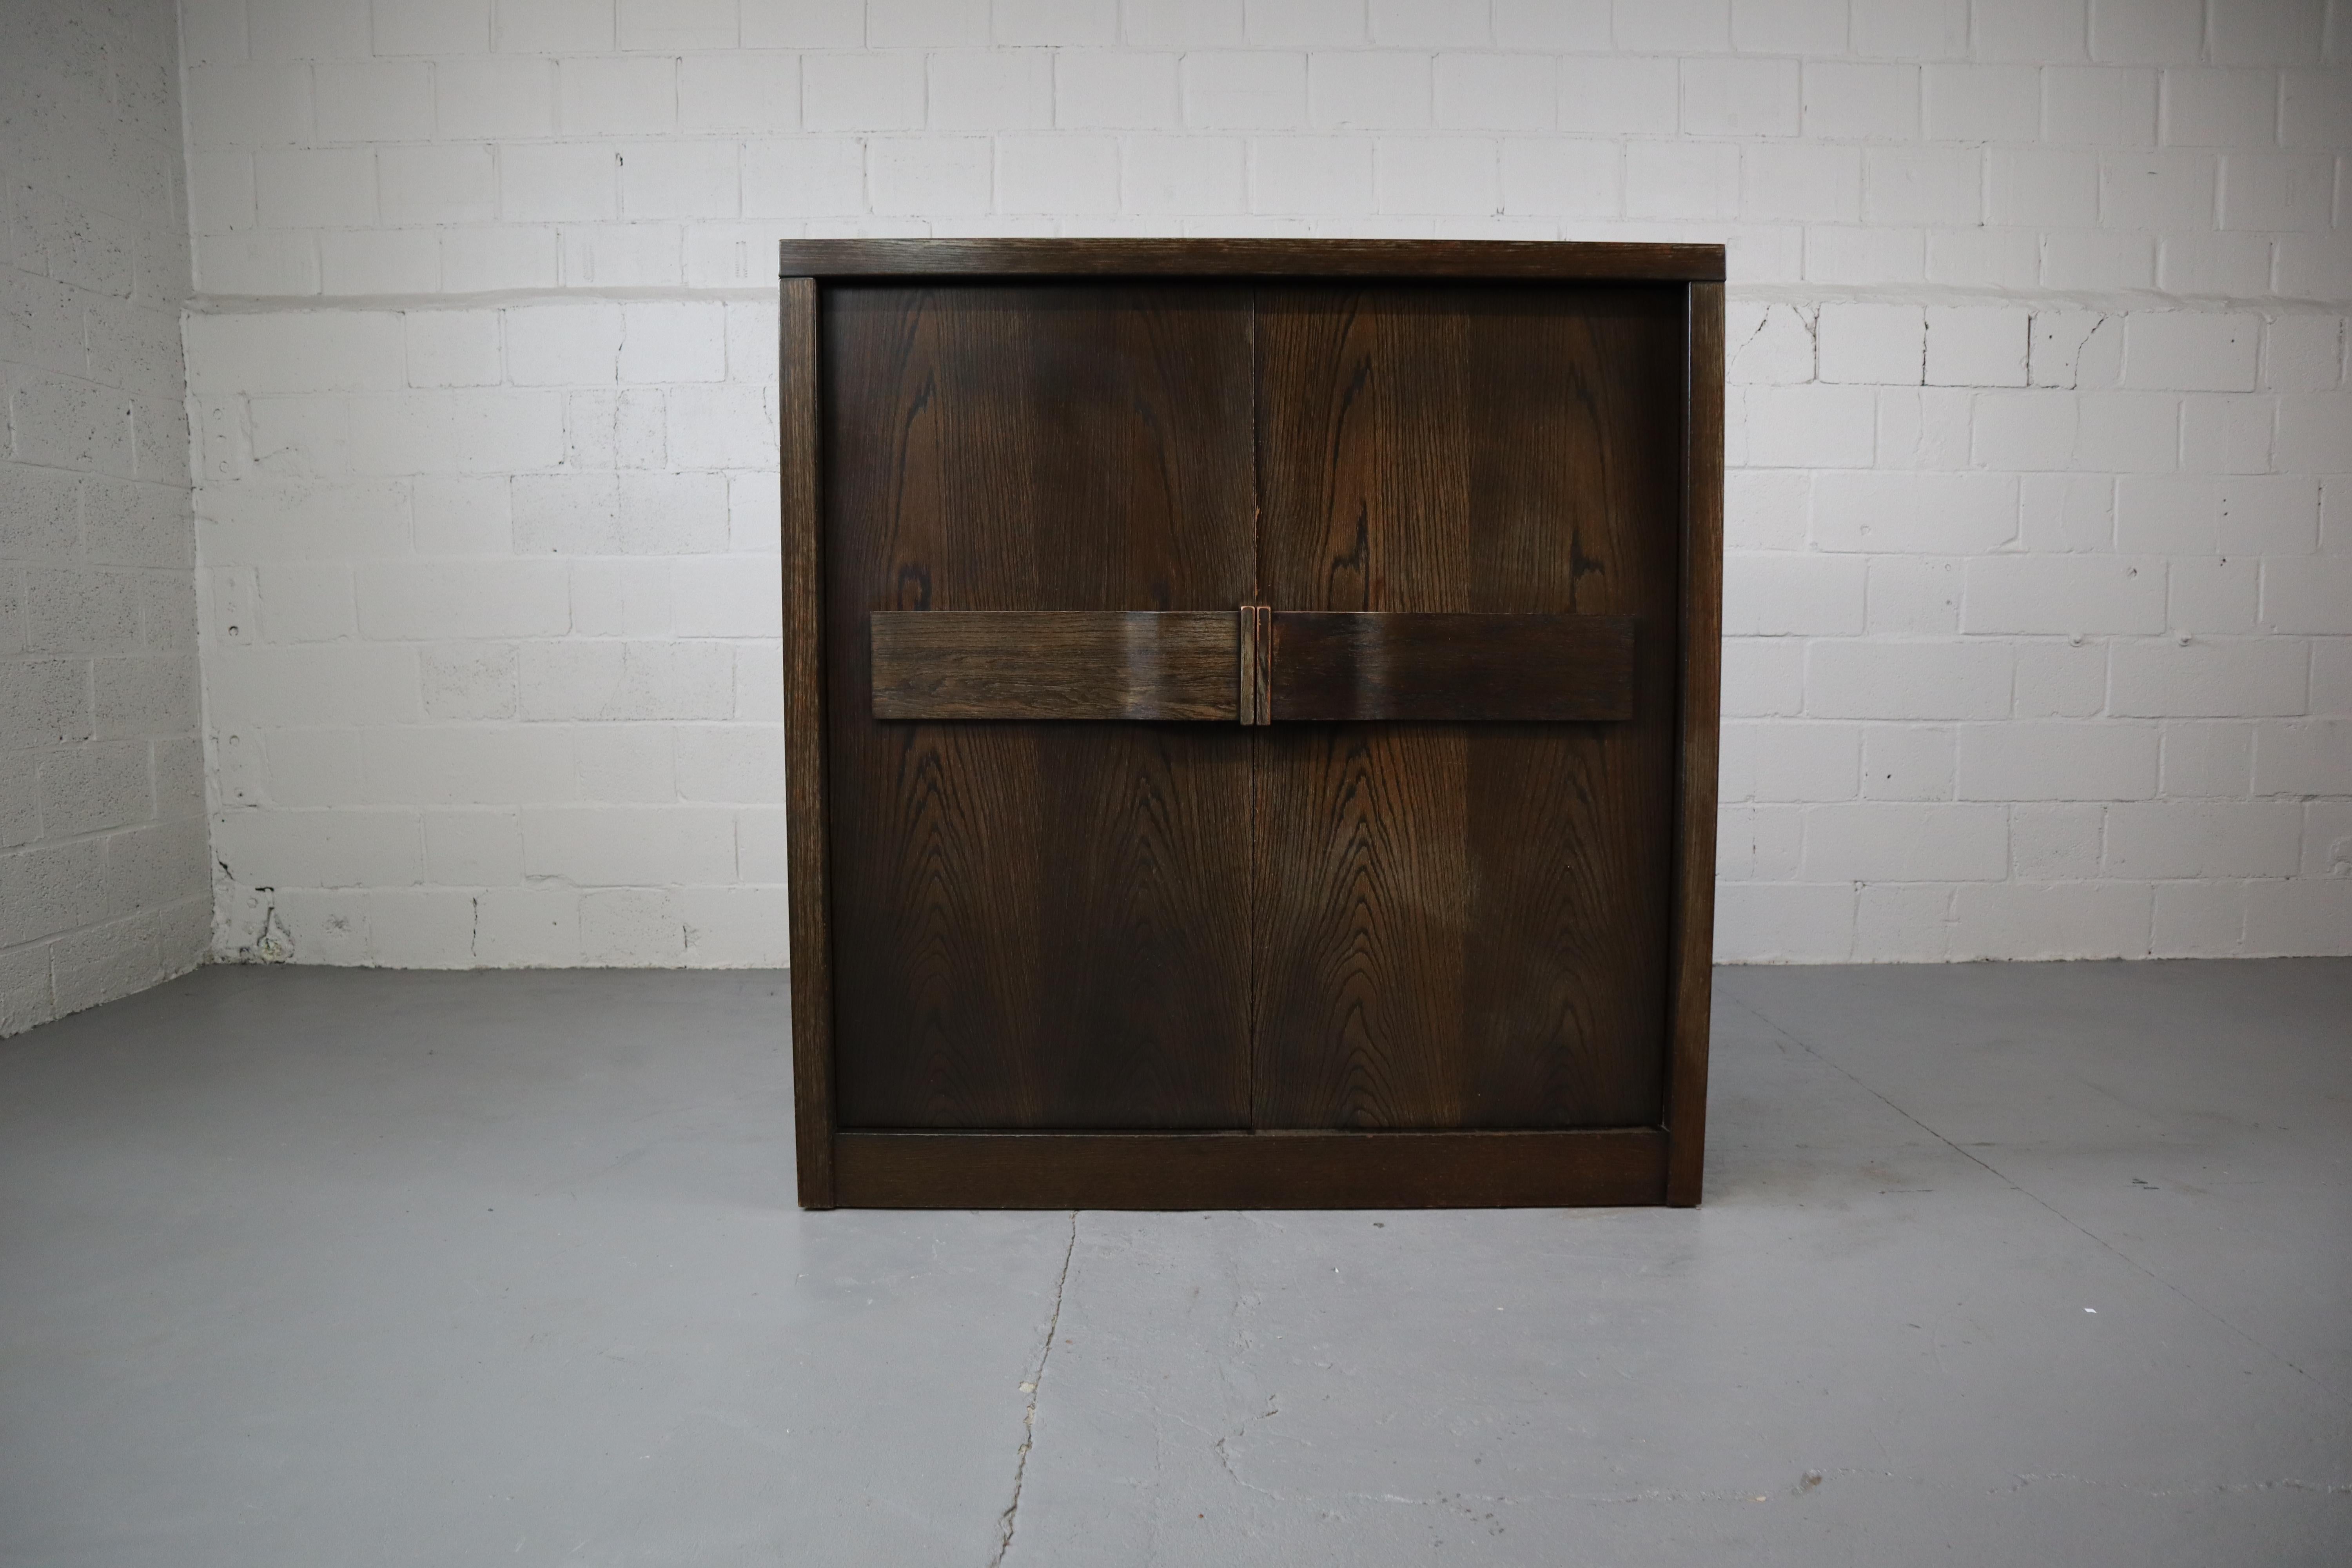 Brutalist bar cabinet, Belgium 1970's!
Brutalist bar cabinet with two doors, several shelves, 3 drawers and an illuminated bar area.
The doors have beautiful curved plywood handles.

Sideboard is also available!!